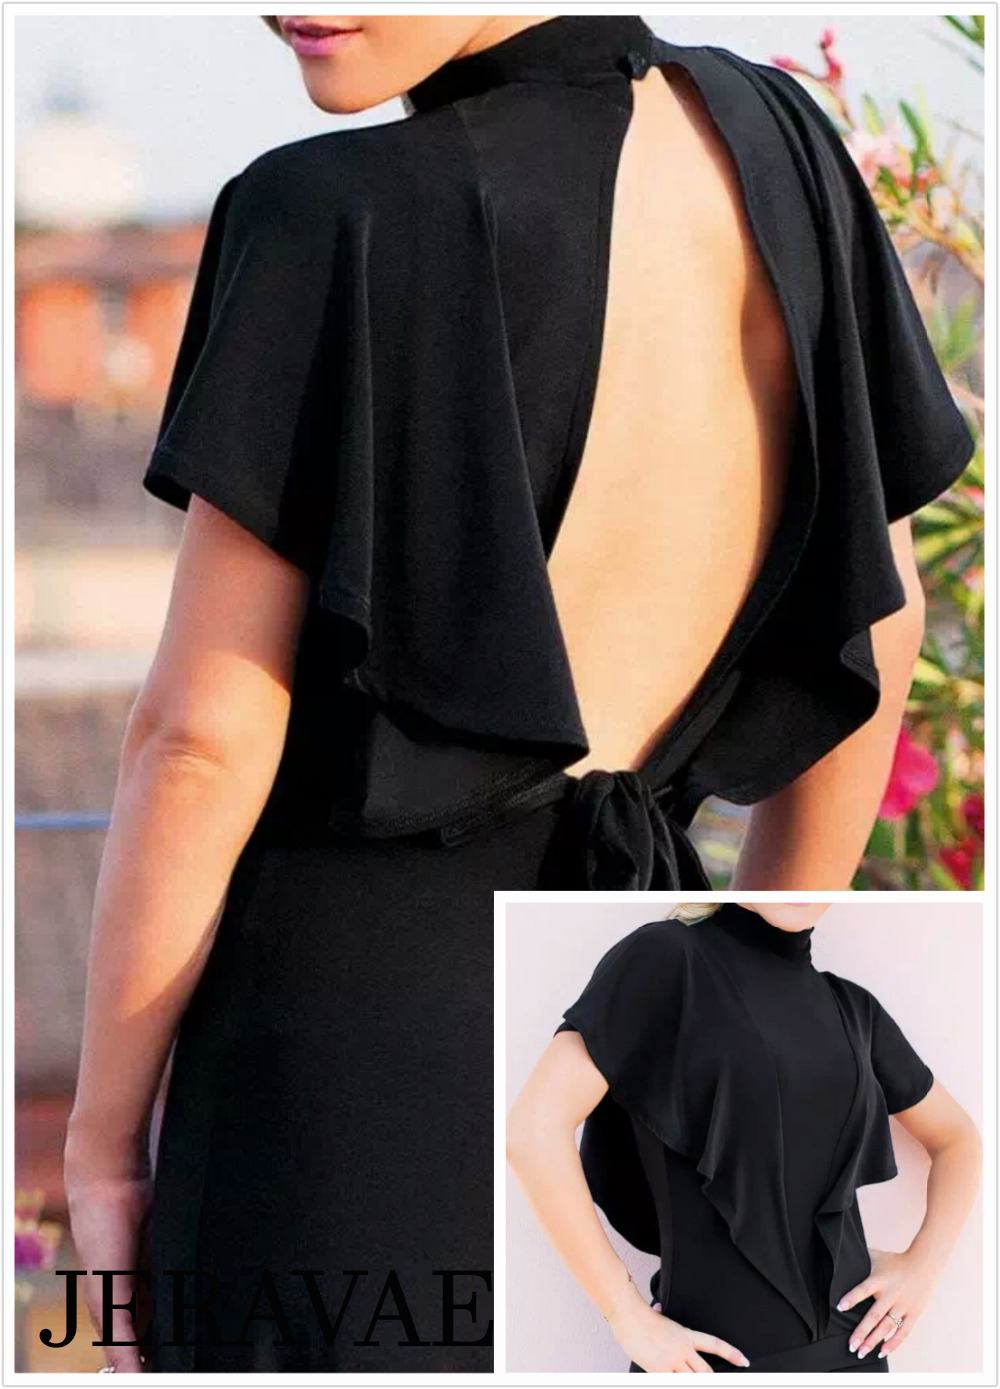 Black Ballroom or Latin Practice Top with Double Sash Sleeves and Open Back with Tie Available in Sizes S-3XL PRA 271